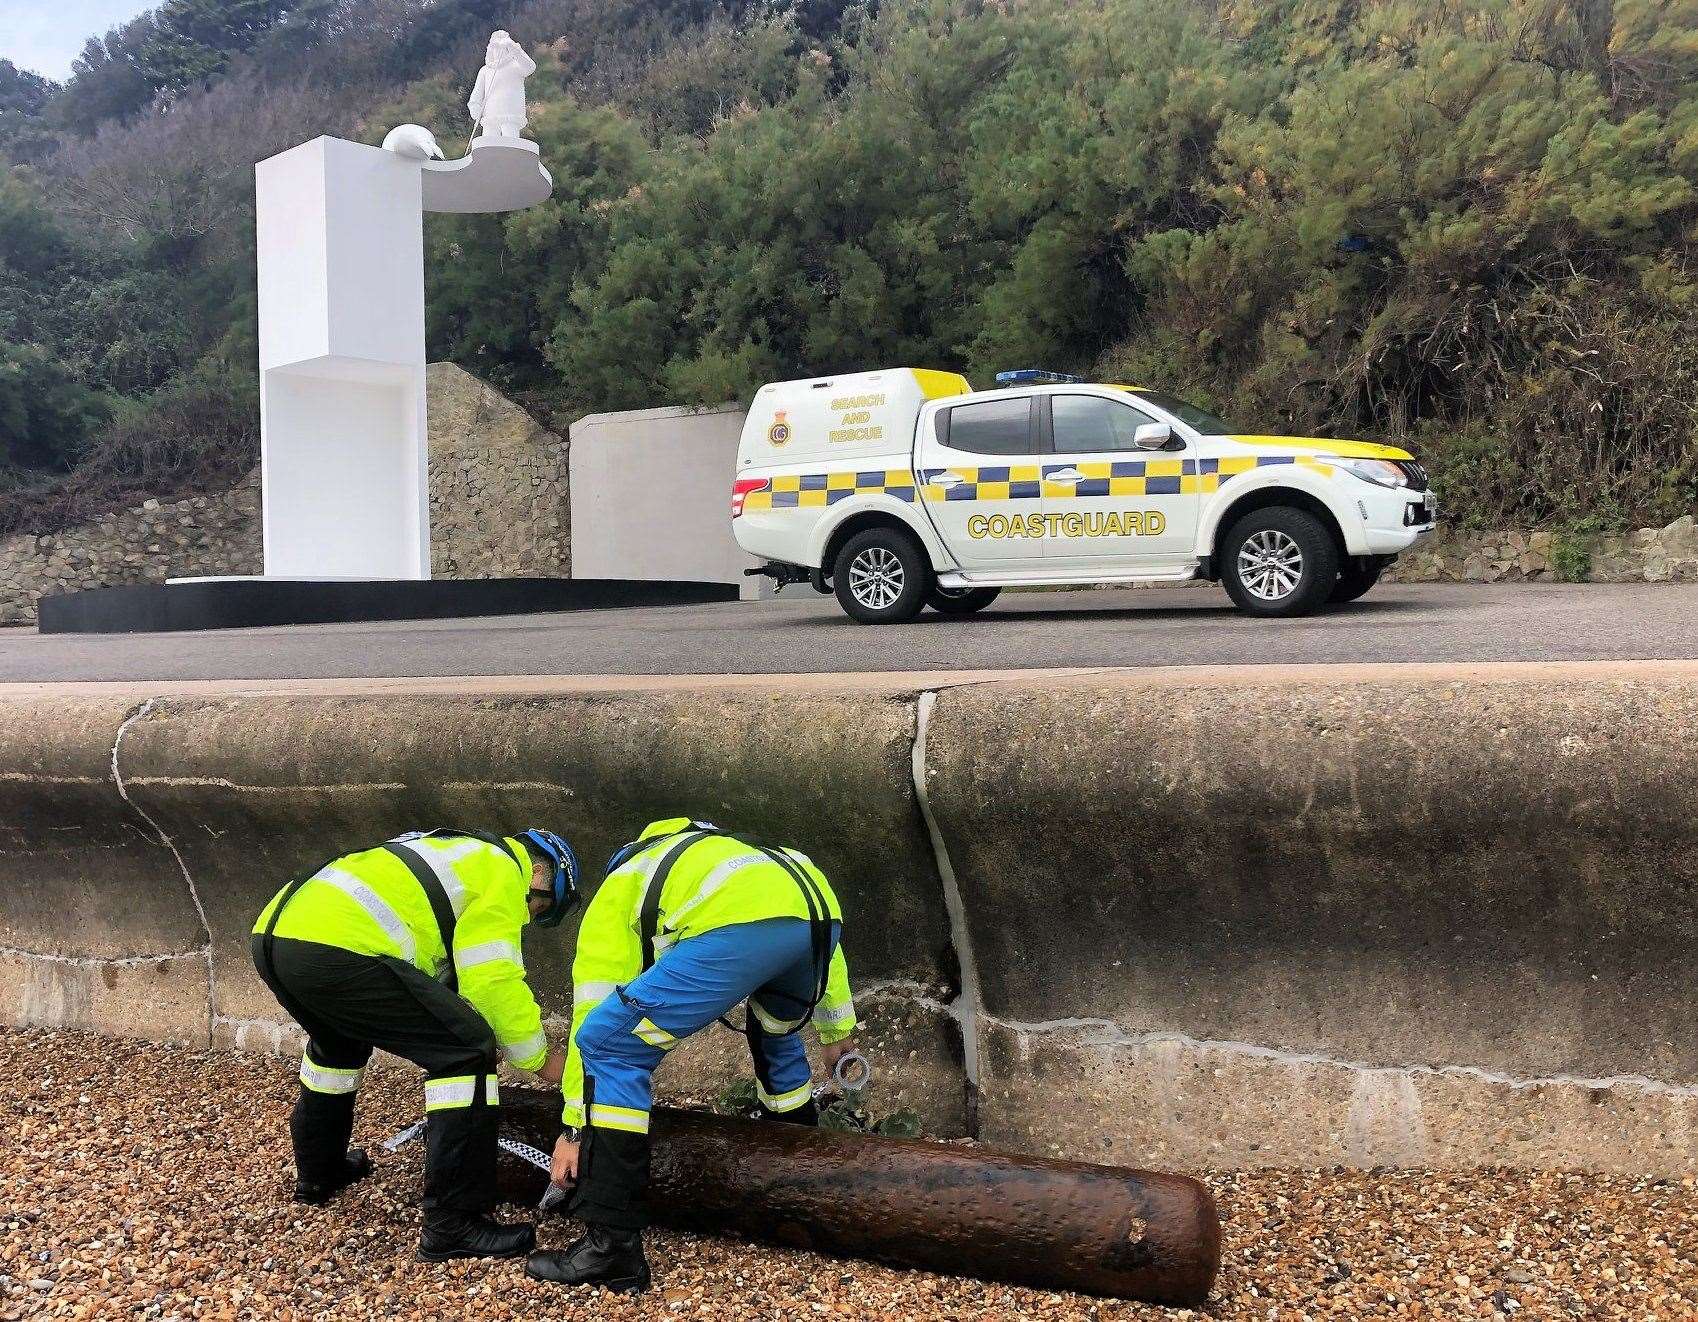 Teams from the coastguard taped the object up and moved it to one side. Picture: Folkestone Coastguard